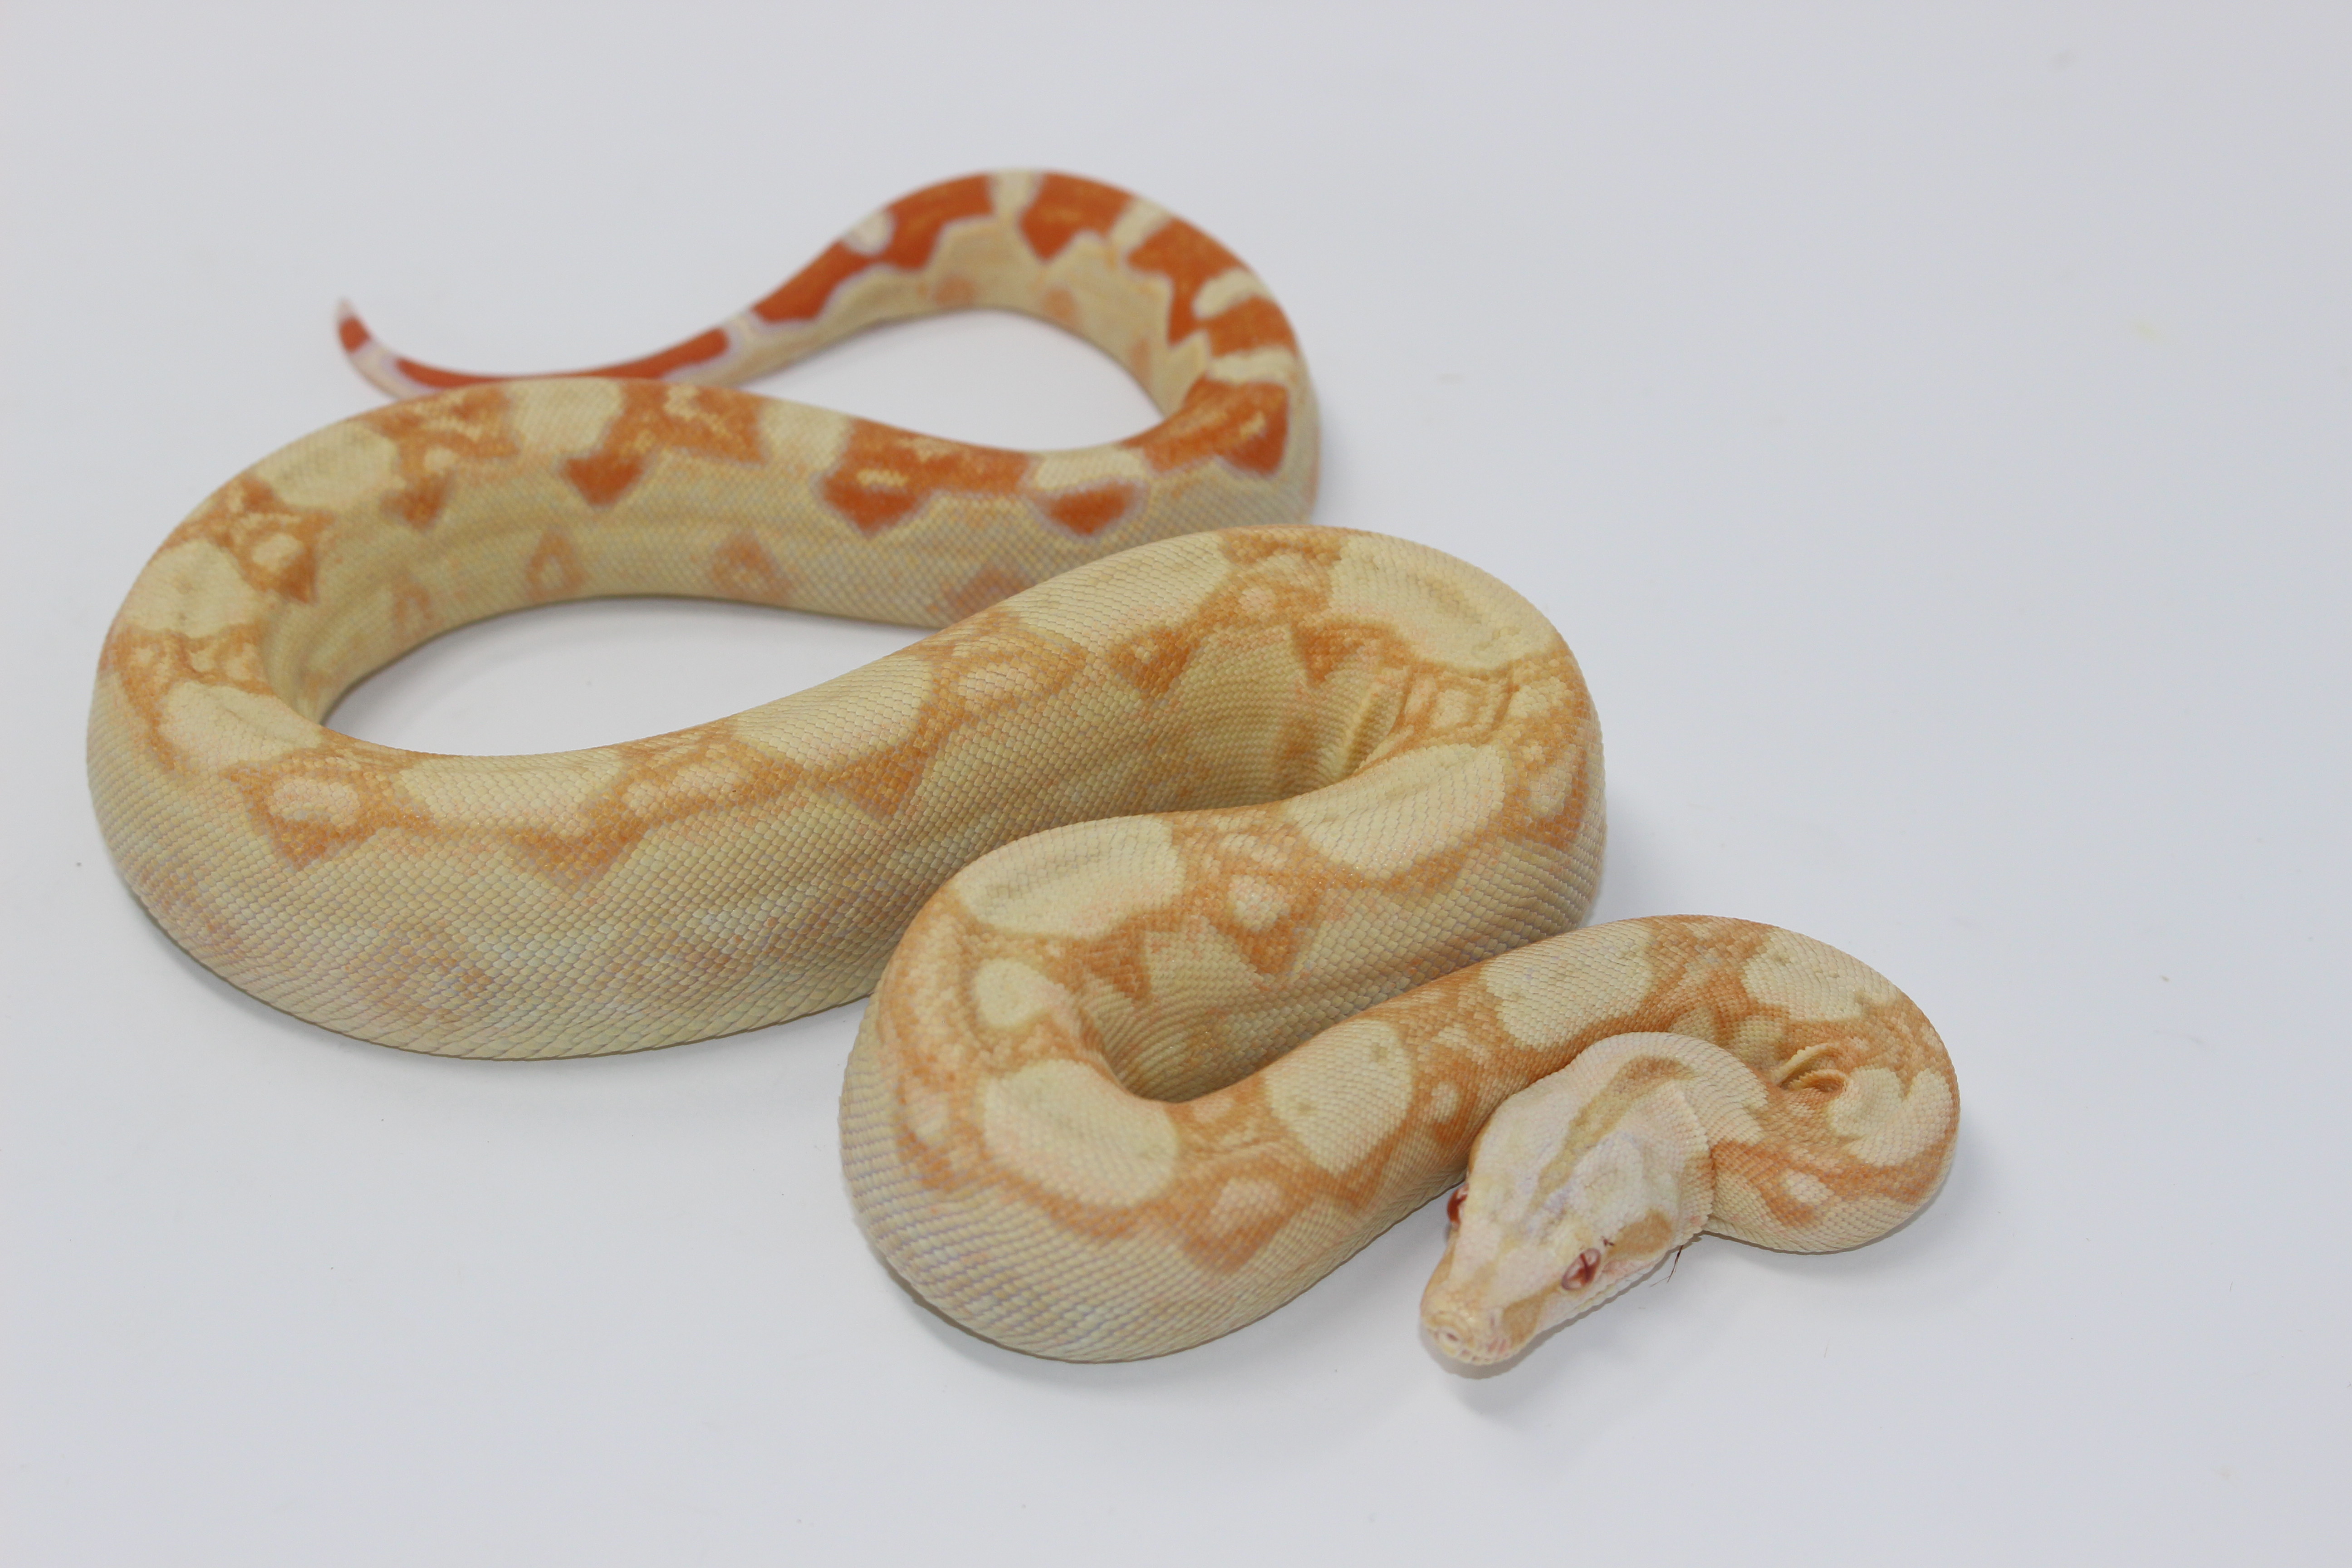 Kahl Albino Boa Constrictor by Imperial Reptiles & Exotics, LLC